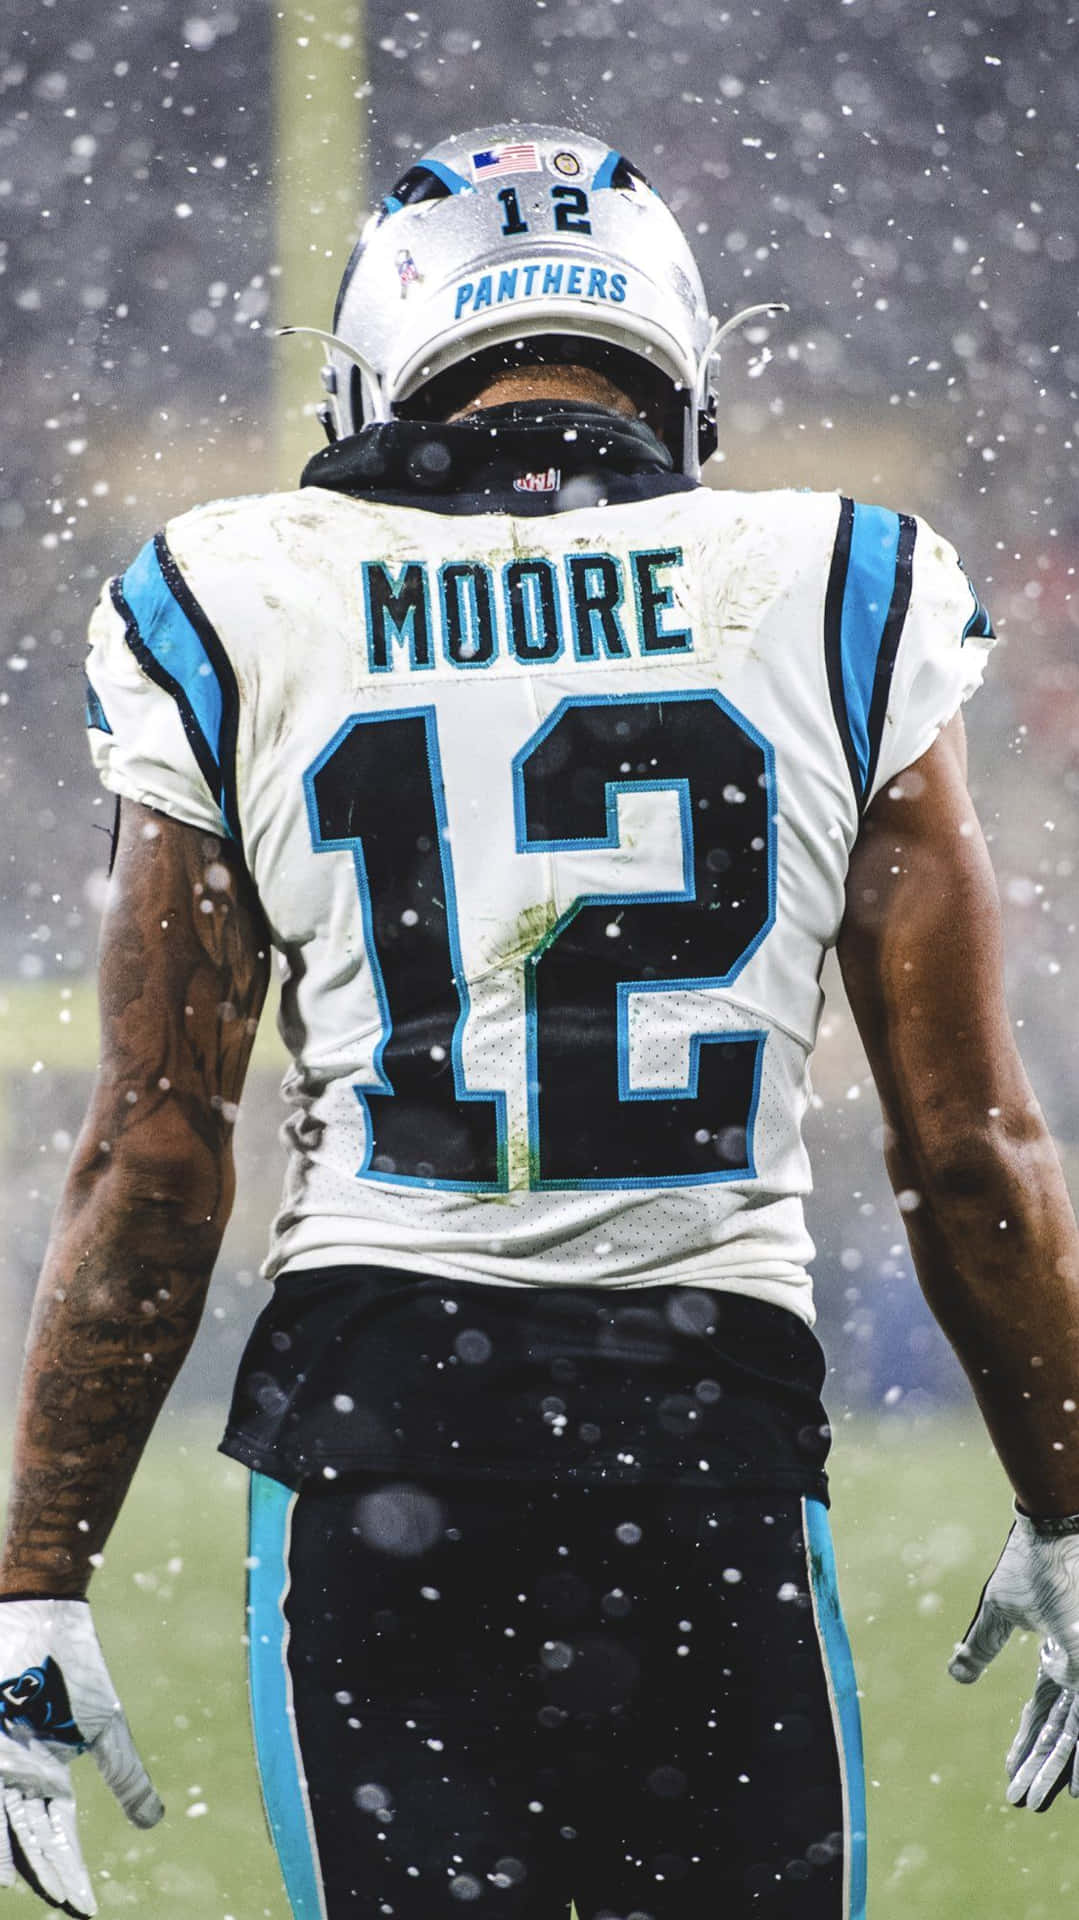 Fotbollsspelaredj Moore Carolina Panthers Vit 12 - Would Be The Translation Of The Given Sentence Into Swedish. In The Context Of Computer Or Mobile Wallpaper, It Might Be Describing A Particular Image Or Design Featuring Football Player Dj Moore From The Carolina Panthers, Against A White Background, And Possibly With The Number 12 Displayed Prominently As Well. Wallpaper